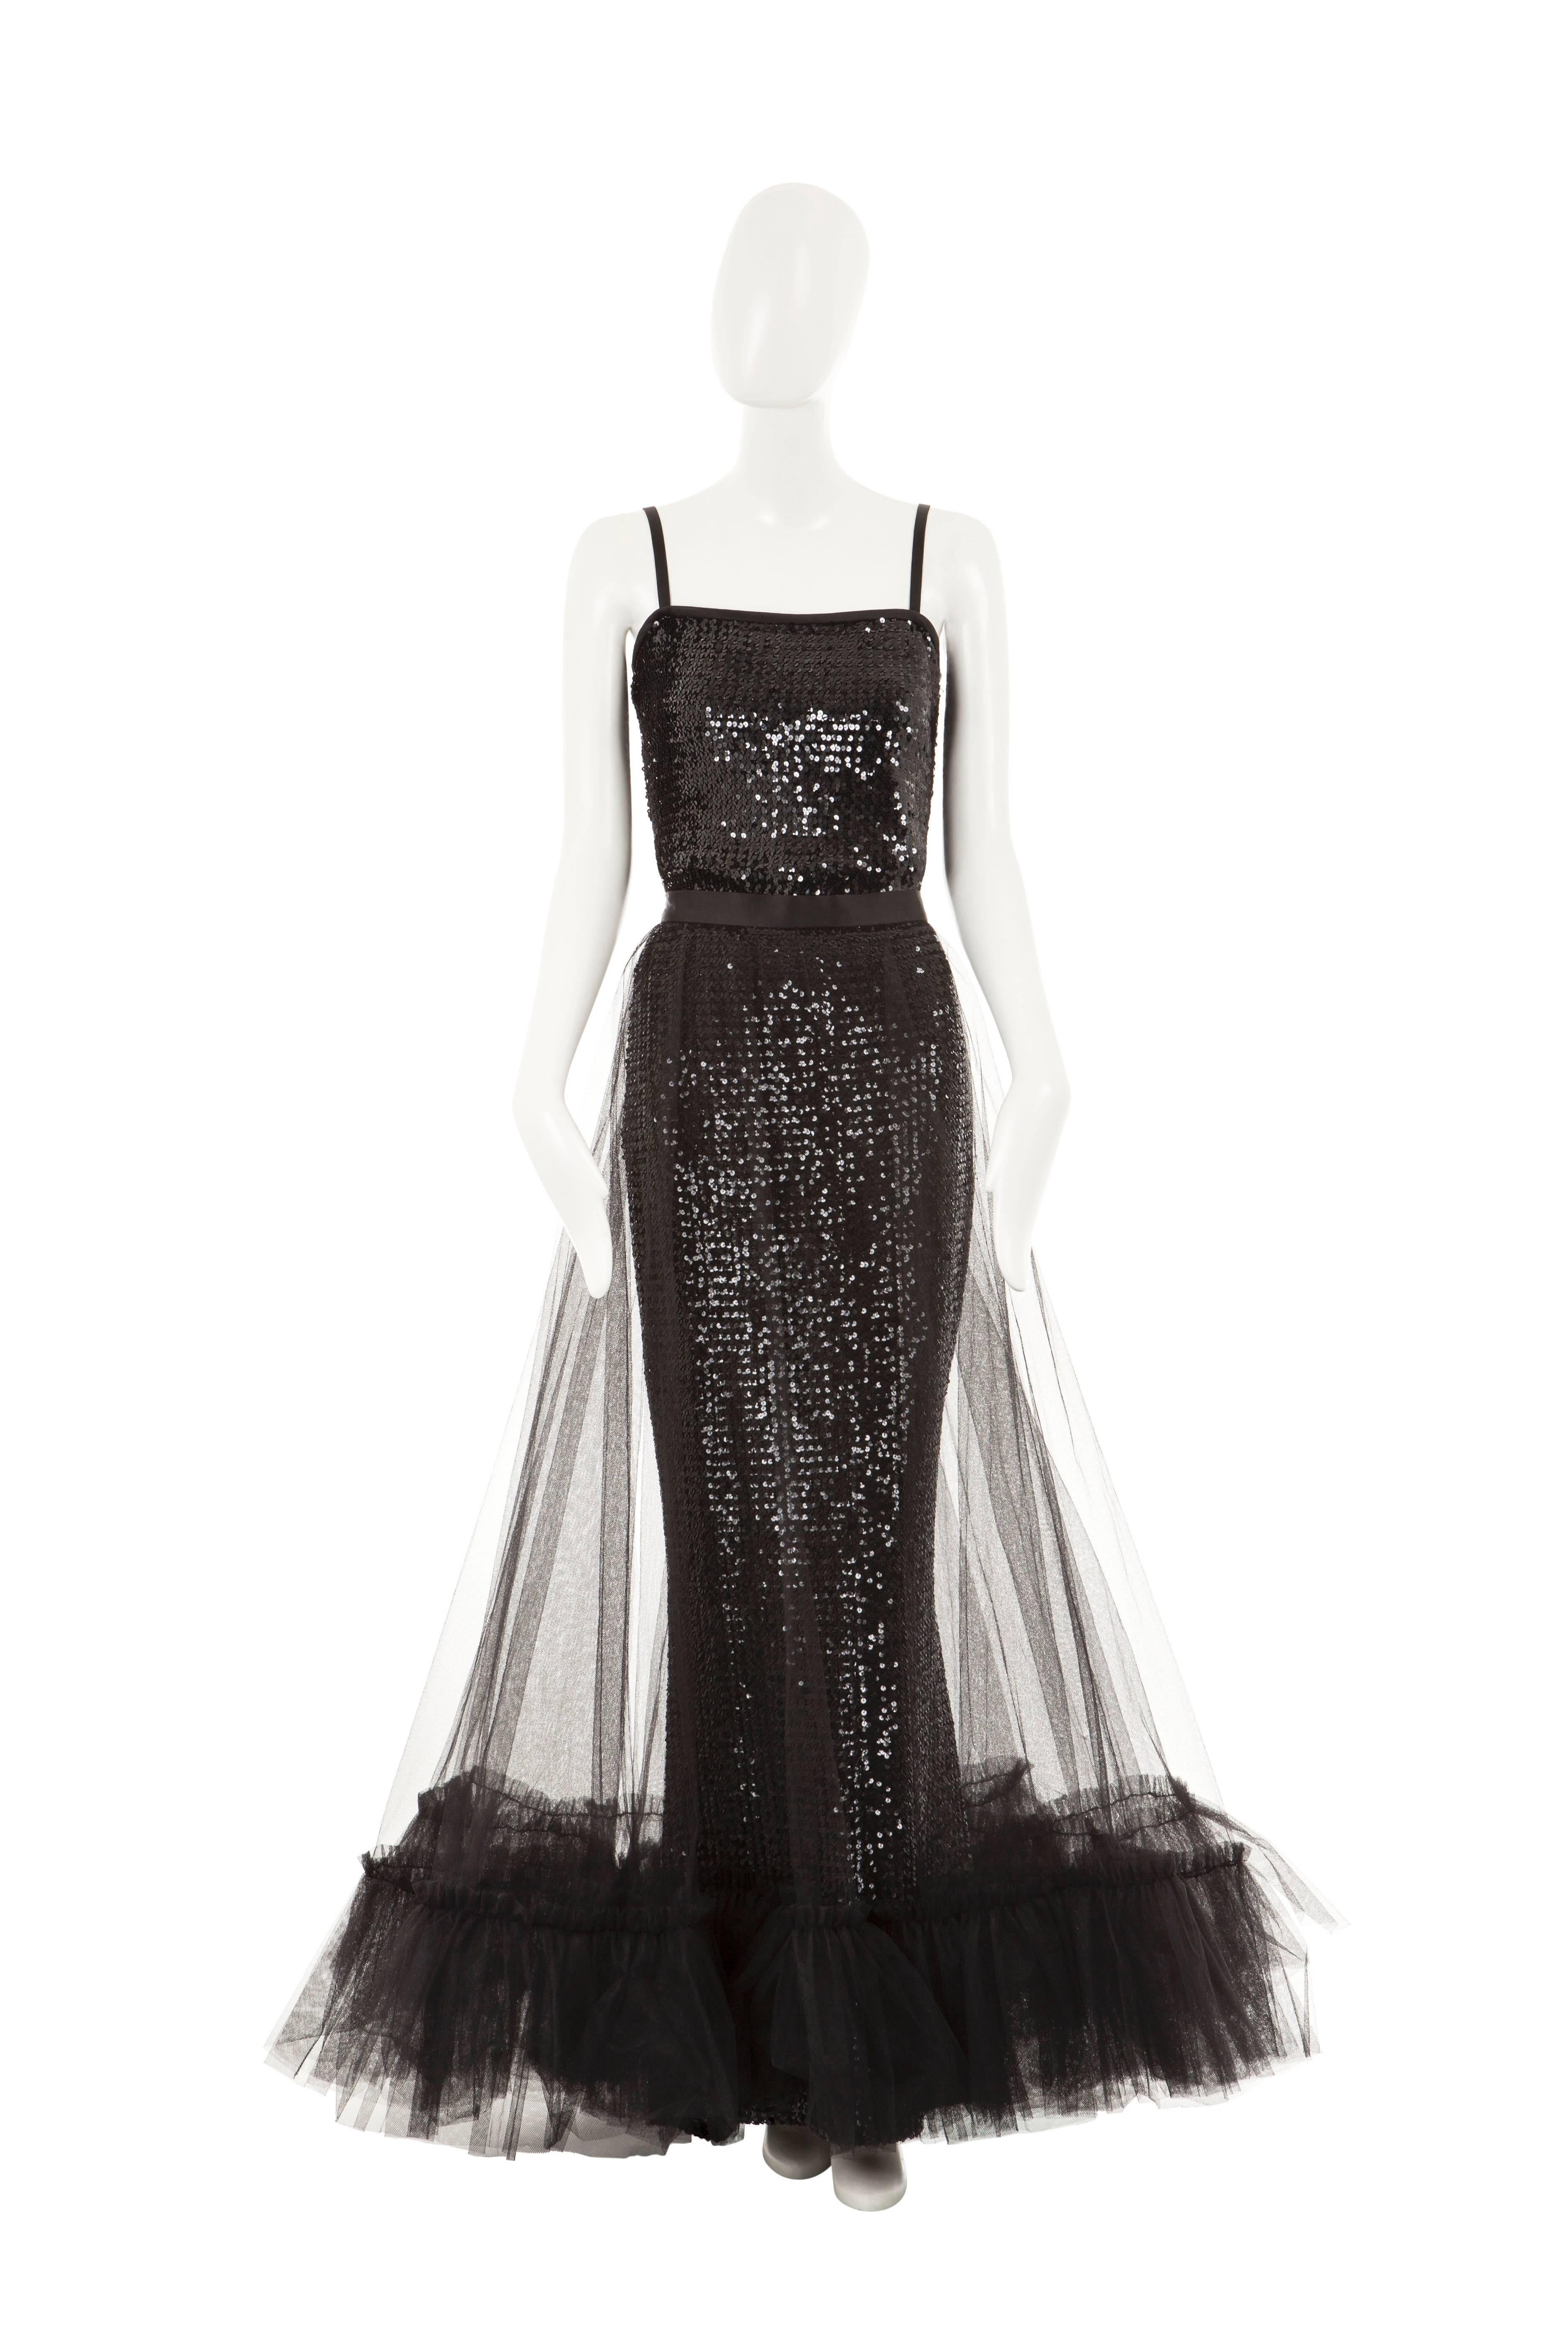 Yves Saint Laurent sequin and tulle gown, 1981 For Sale